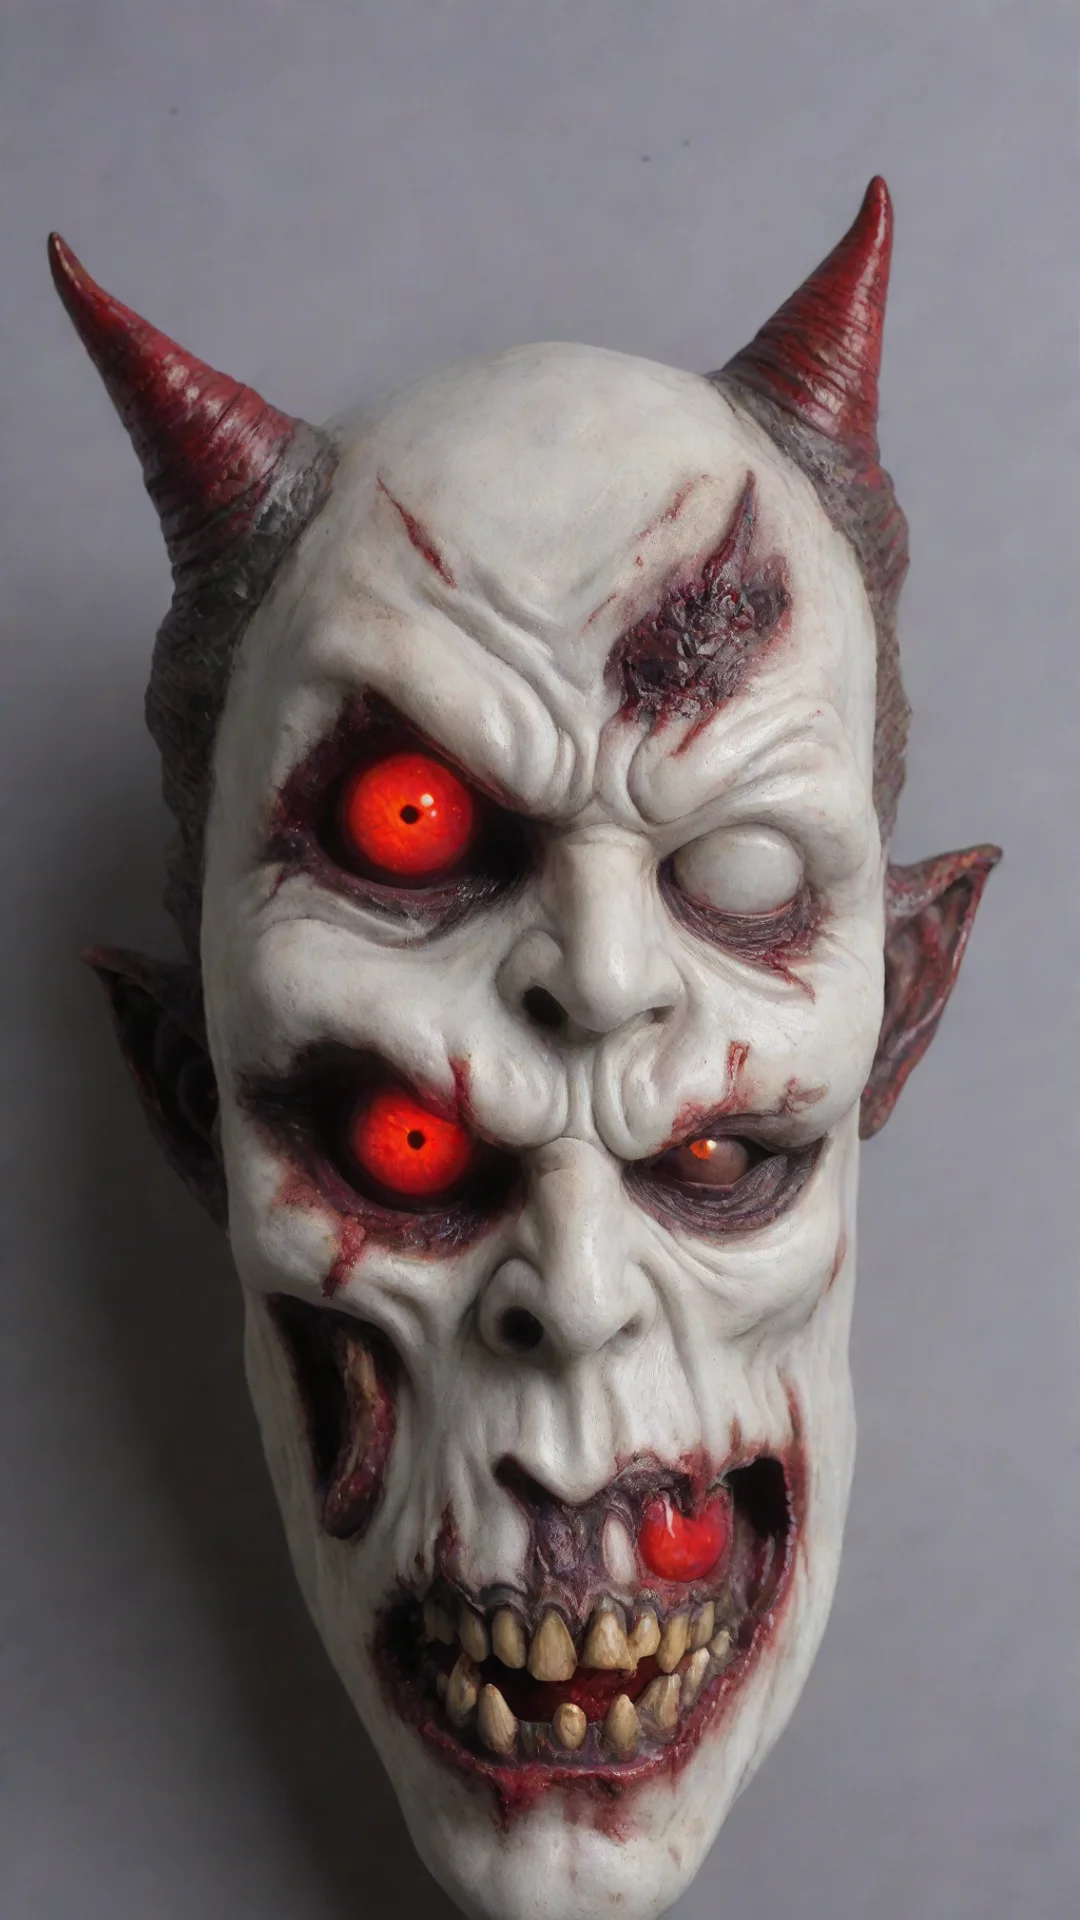 an evil mask demon with glowing red eyes and a porcelain finish tall